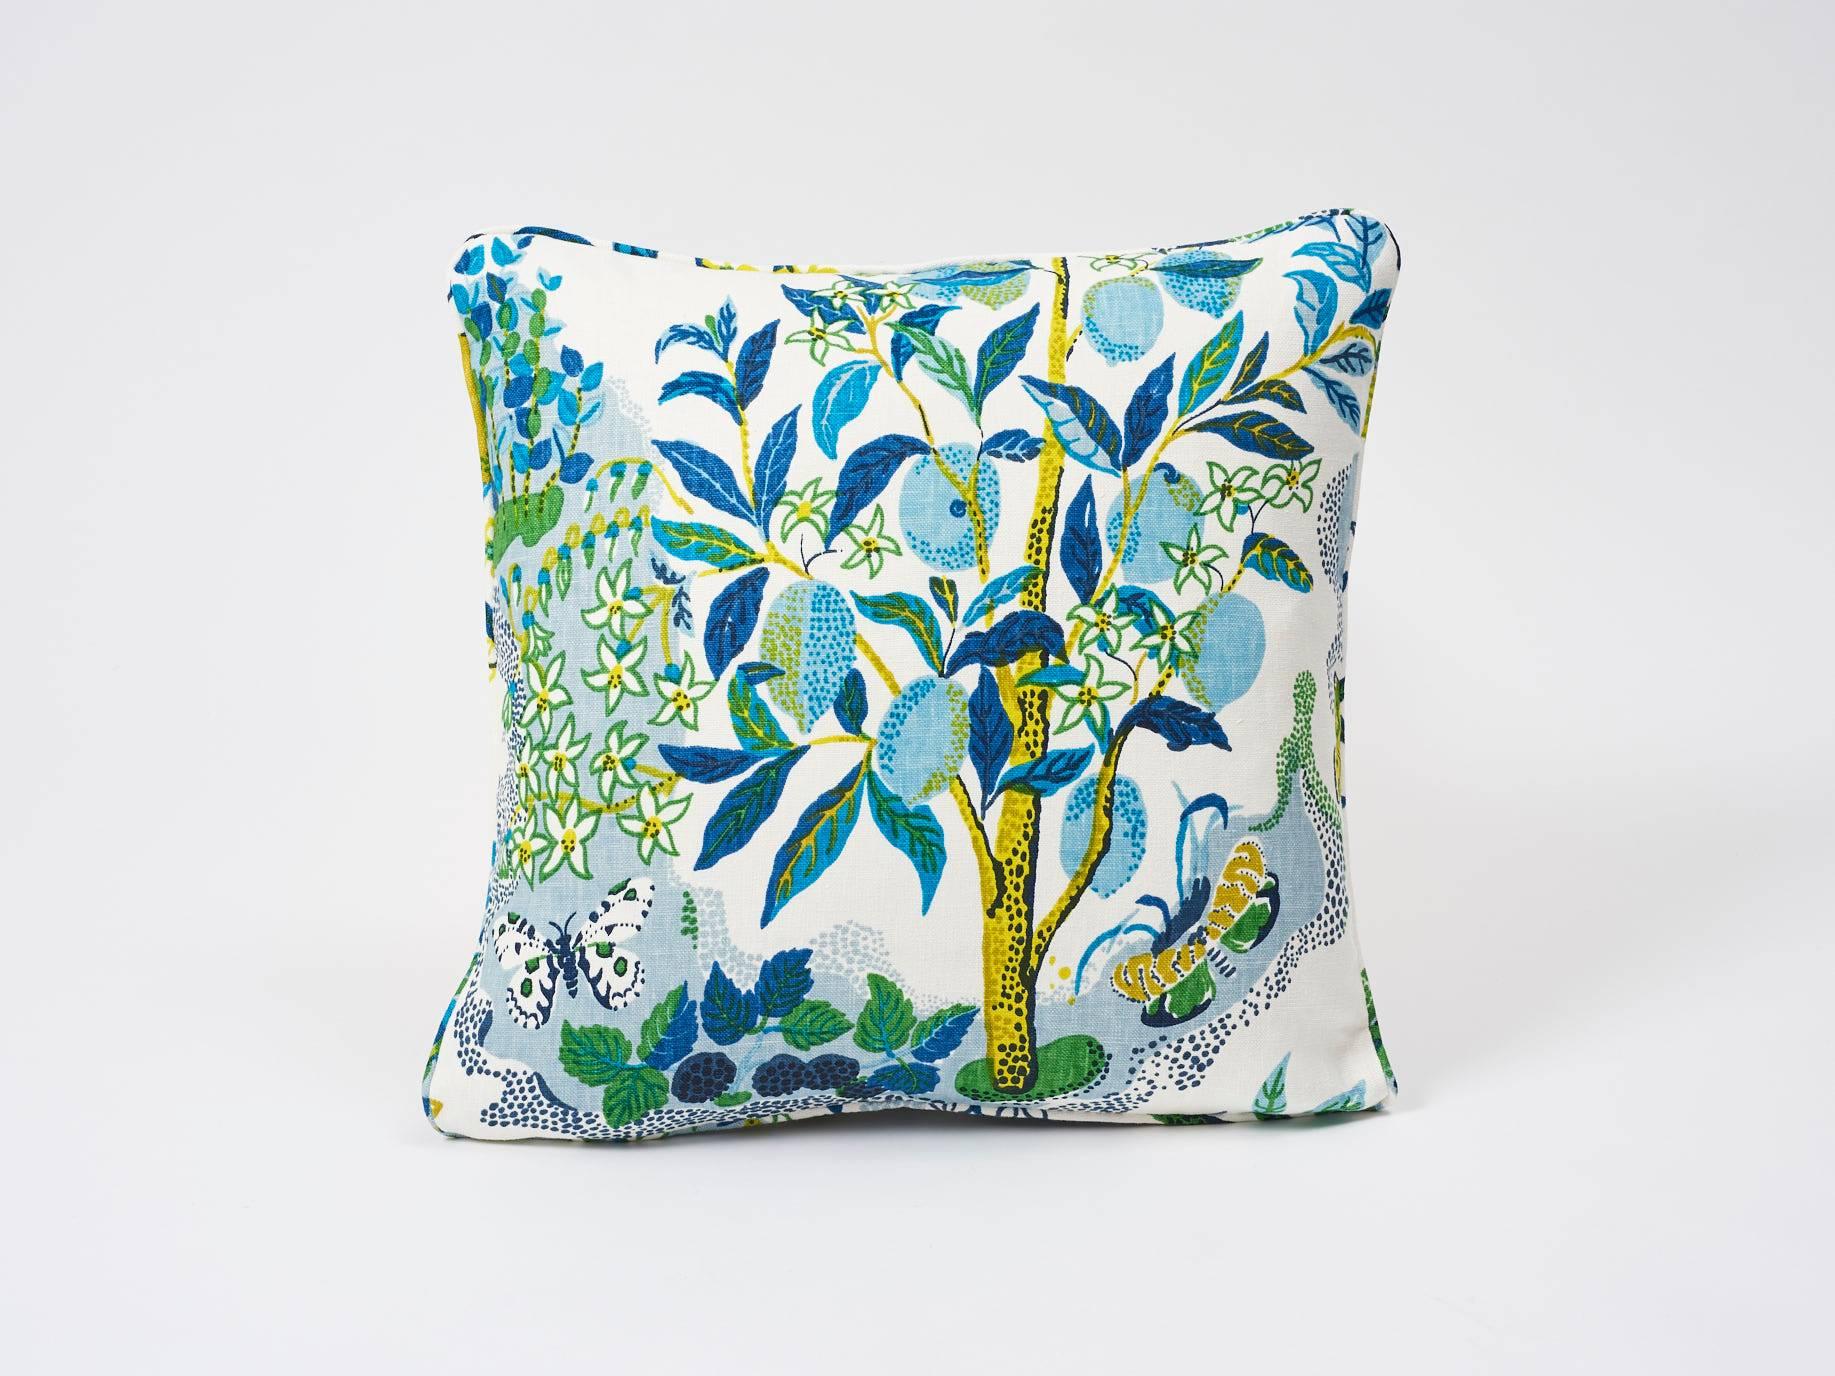 This archival Josef Frank print, created in 1947, bears the signature whimsy, color and personality for which the designer is known. The hand-drawn pattern has inimitable charm. Now featured as a stunning decorative accent, in Primary, this is sure